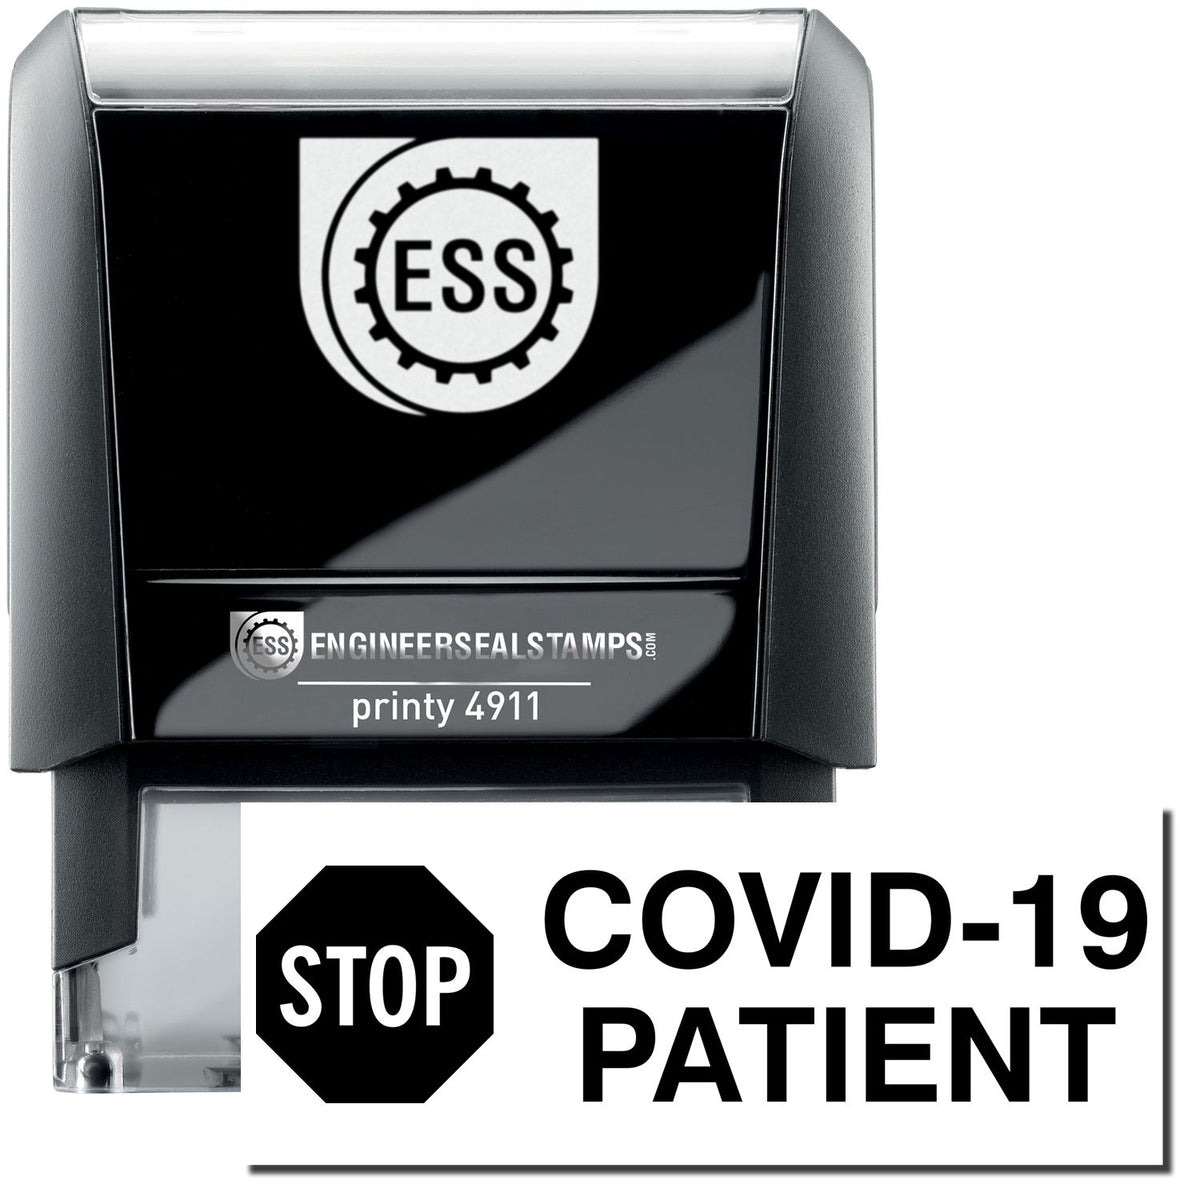 A self-inking stamp with a stamped image showing how the text &quot;COVID-19 PATIENT&quot; with an image of a &quot;STOP&quot; sign on the left is displayed after stamping.